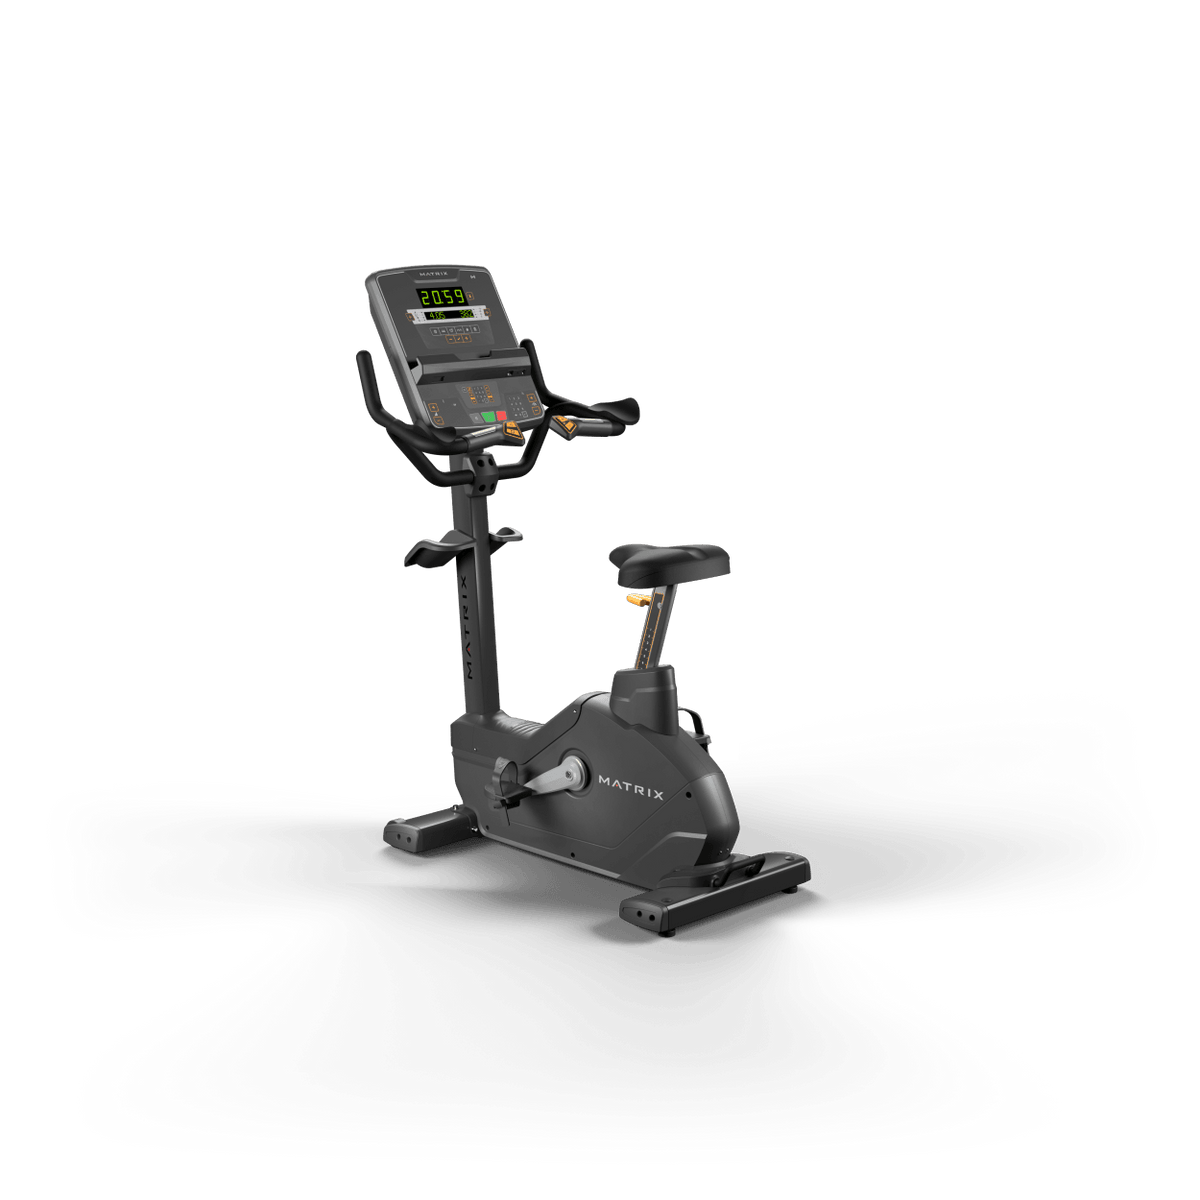 Matrix Fitness Endurance Upright with LED Console full view | Fitness Experience